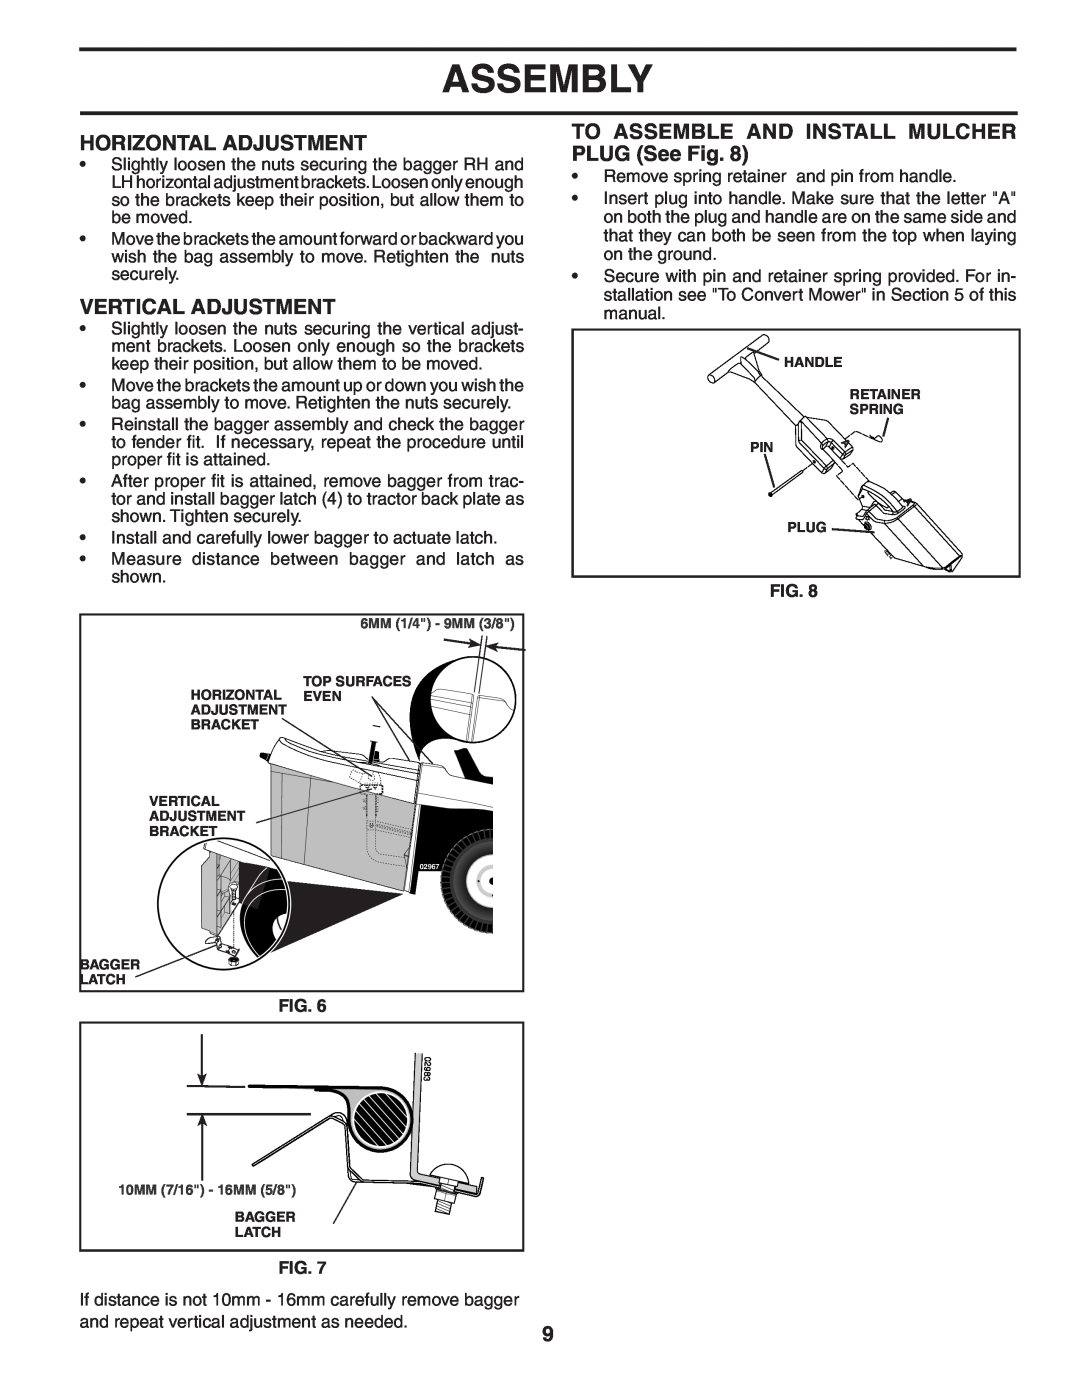 Husqvarna CTH2542 XP Horizontal Adjustment, Vertical Adjustment, TO ASSEMBLE AND INSTALL MULCHER PLUG See Fig, Assembly 